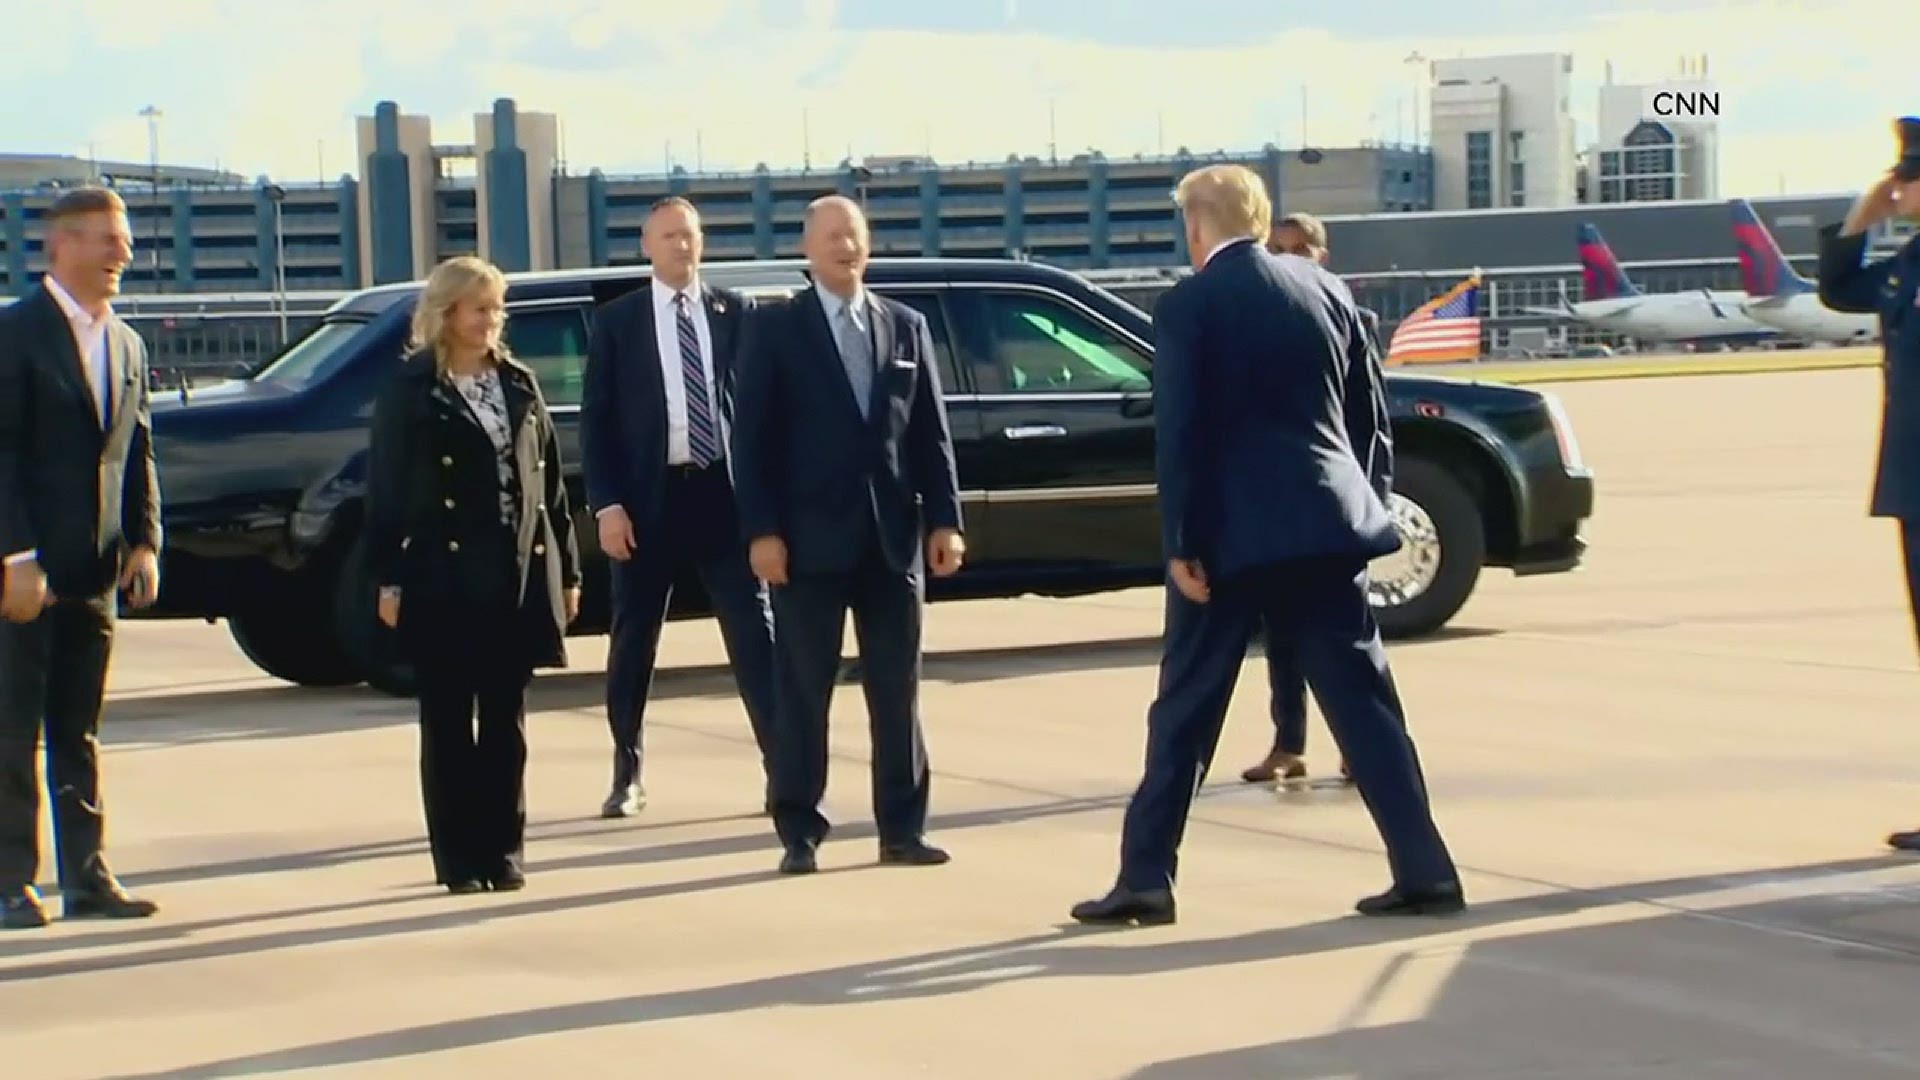 Video shows members of Minnesota's congressional delegation greeting President Trump on arrival at MSP Airport on Wednesday, Sept. 30.